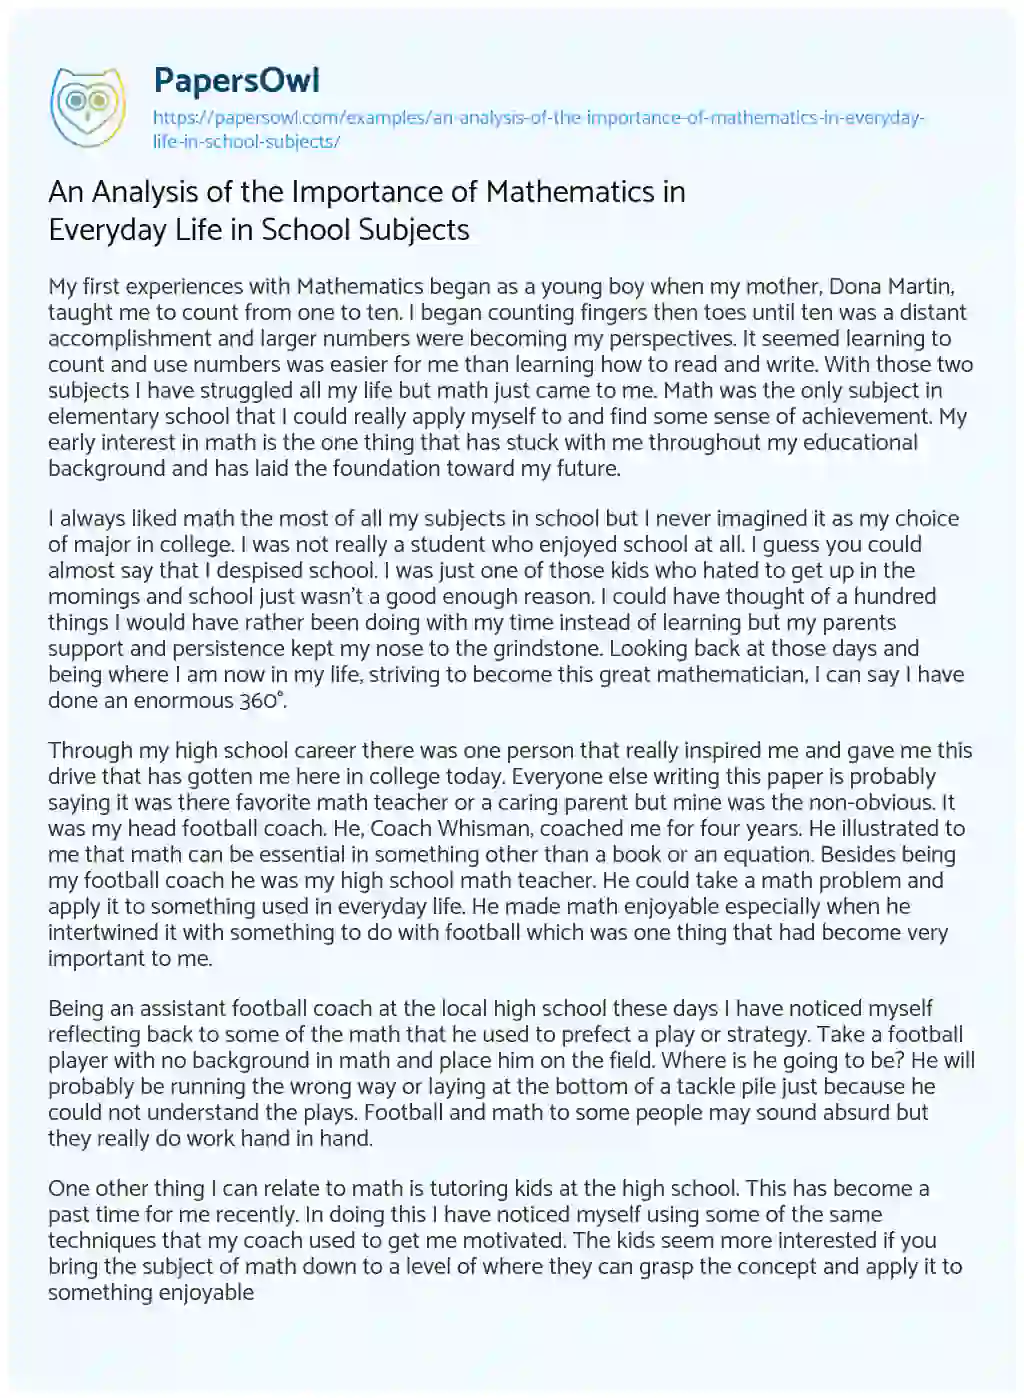 Essay on An Analysis of the Importance of Mathematics in Everyday Life in School Subjects